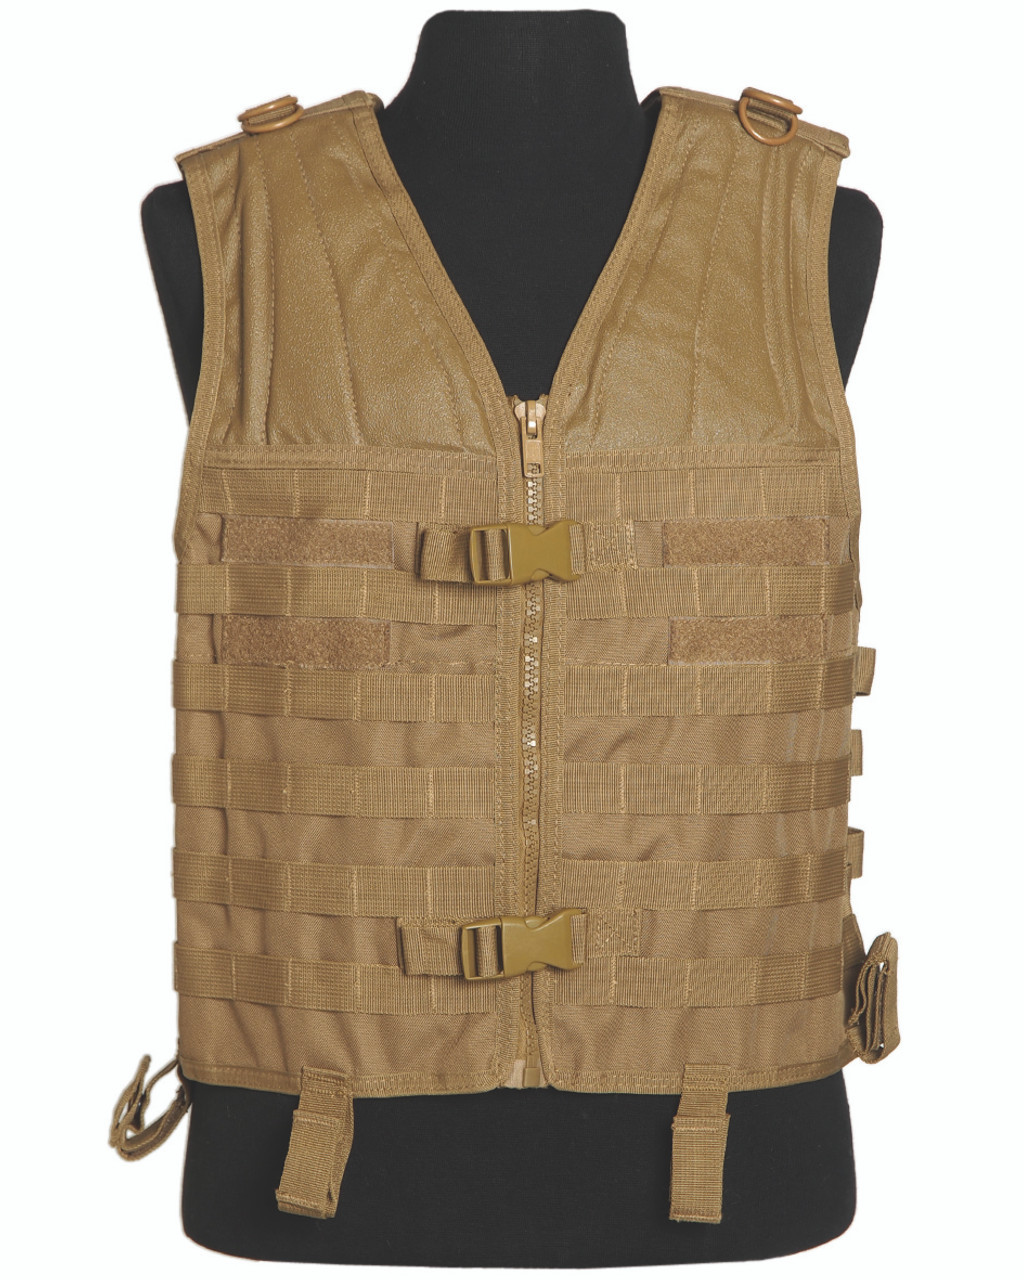 Coyote MOLLE Plate Carrier Vest